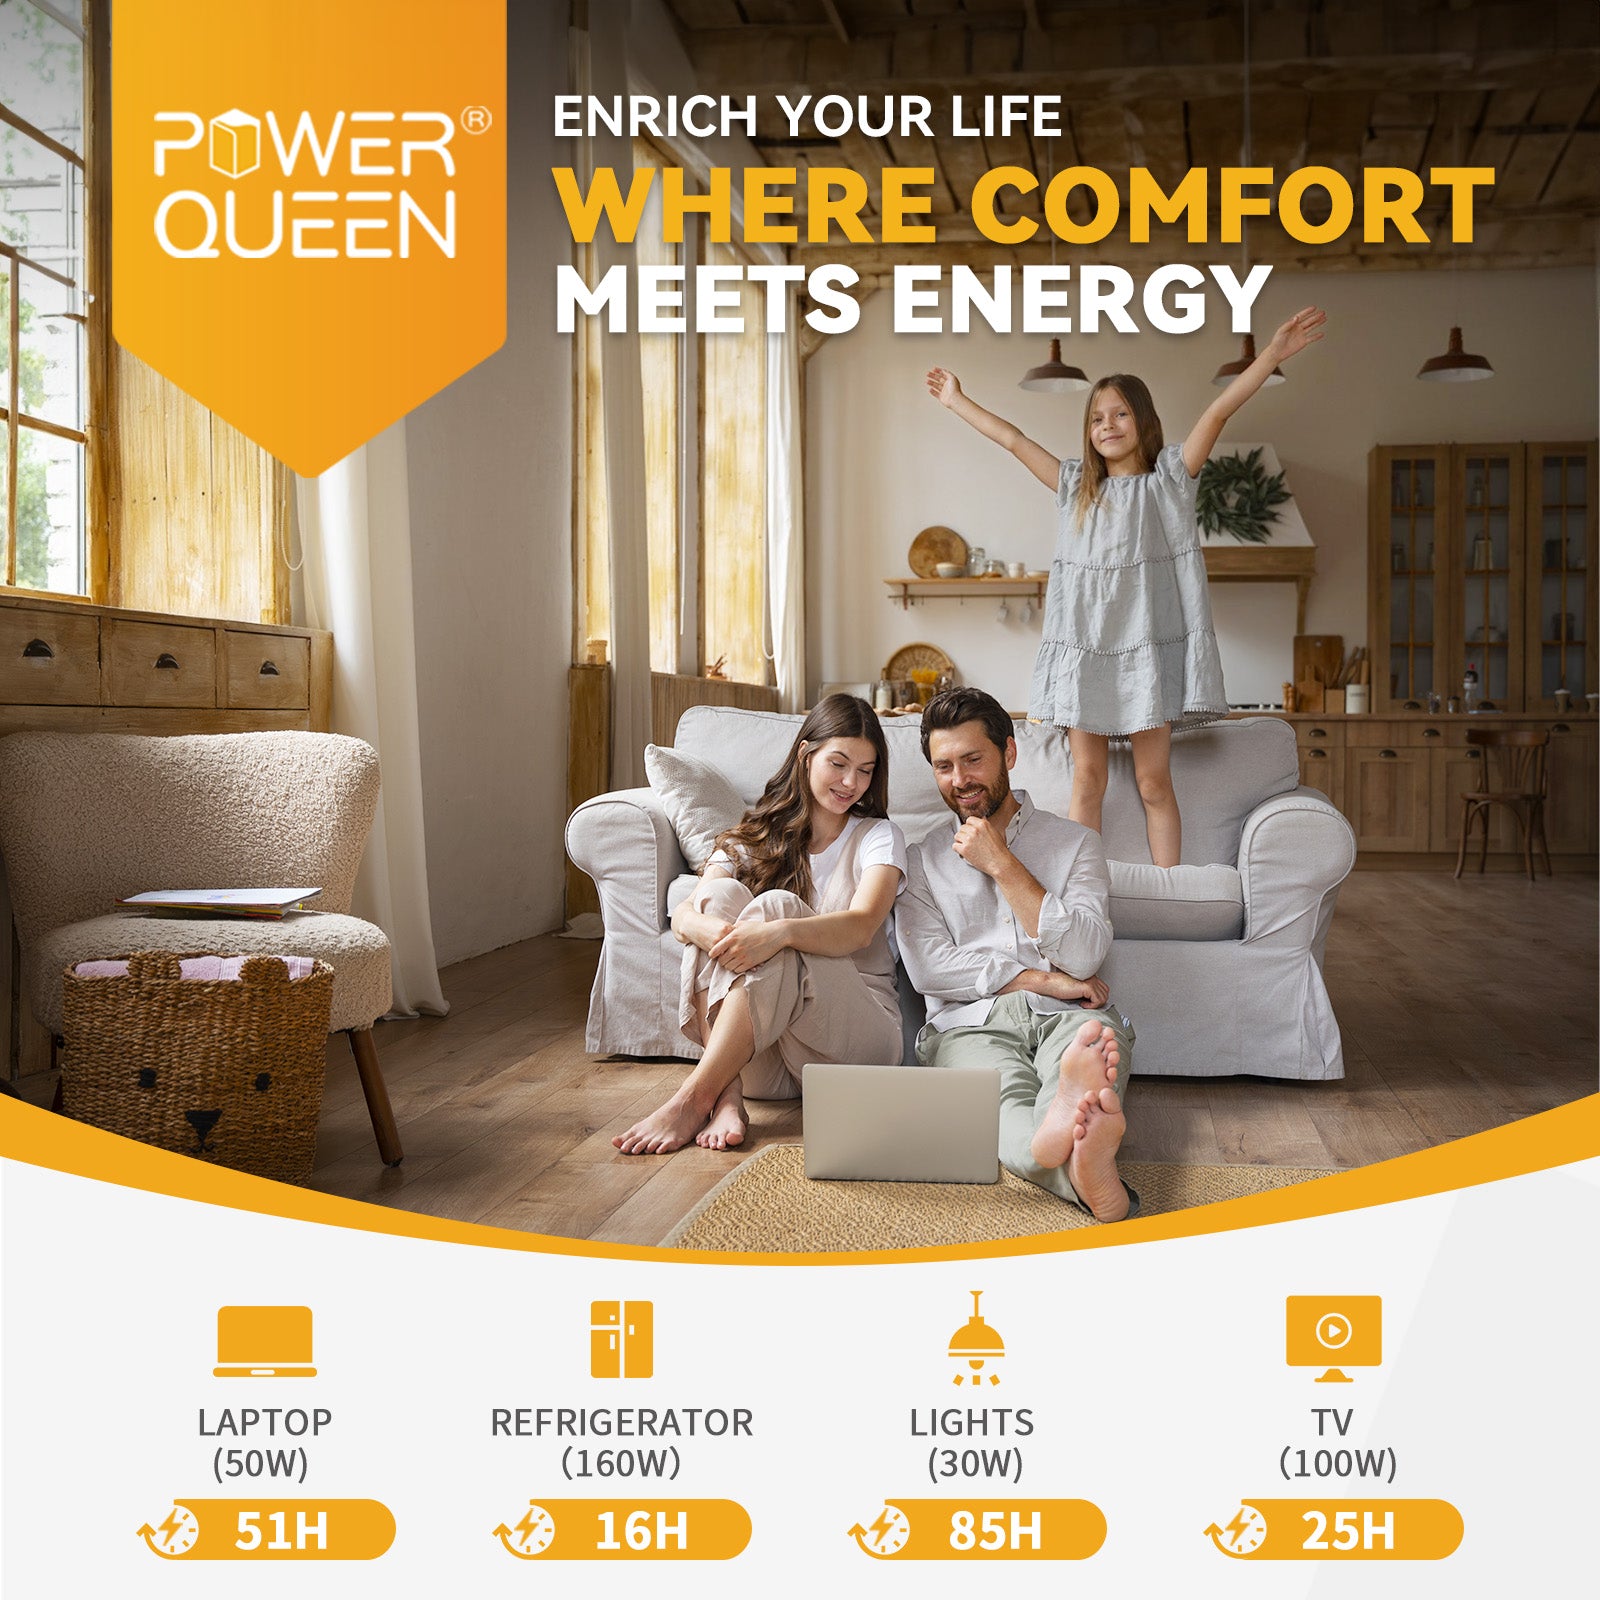 [FromC$710.39]Power Queen 12V 200Ah LiFePO4 Battery